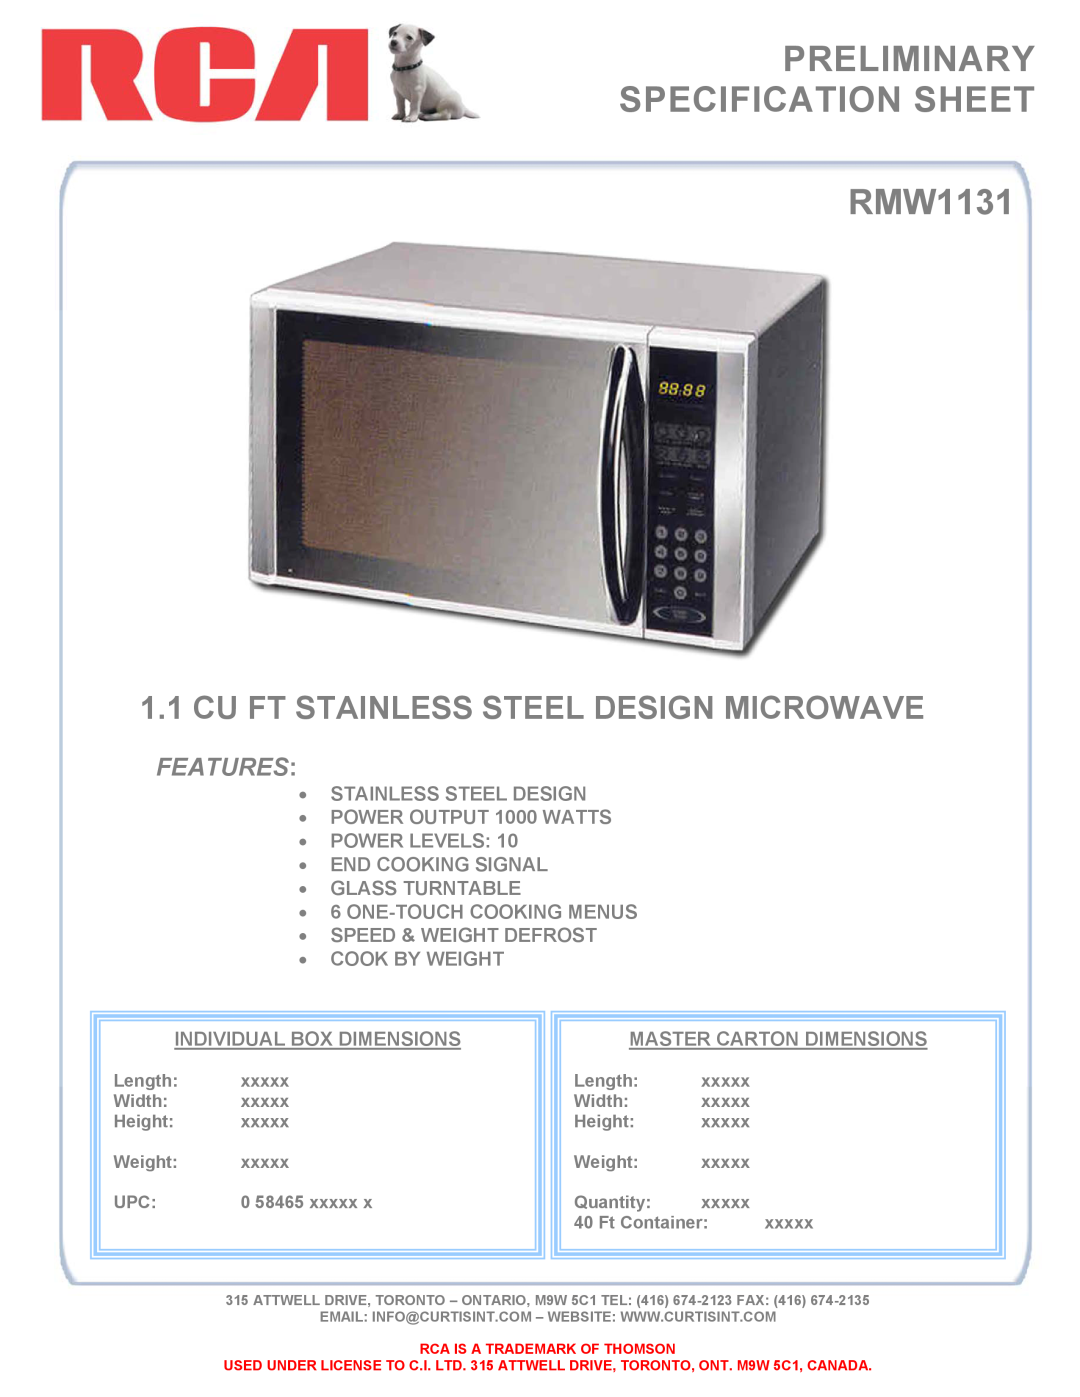 RCA specifications PRELIMINARY SPECIFICATION SHEET RMW1131, Cu Ft Stainless Steel Design Microwave, Features 